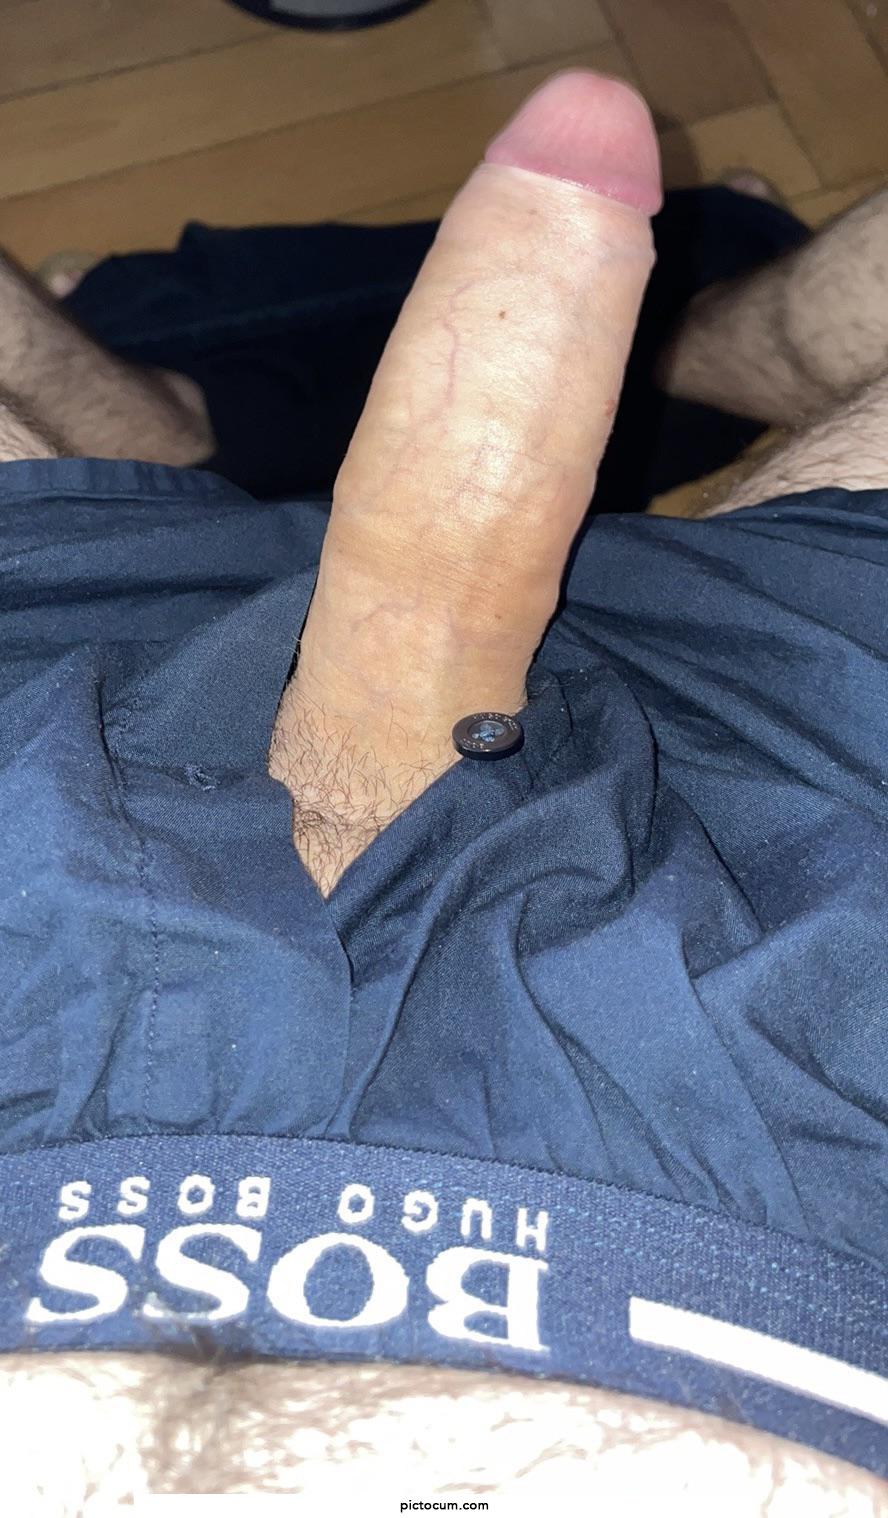 Wanna suck it / see it getting sucked by your gf?